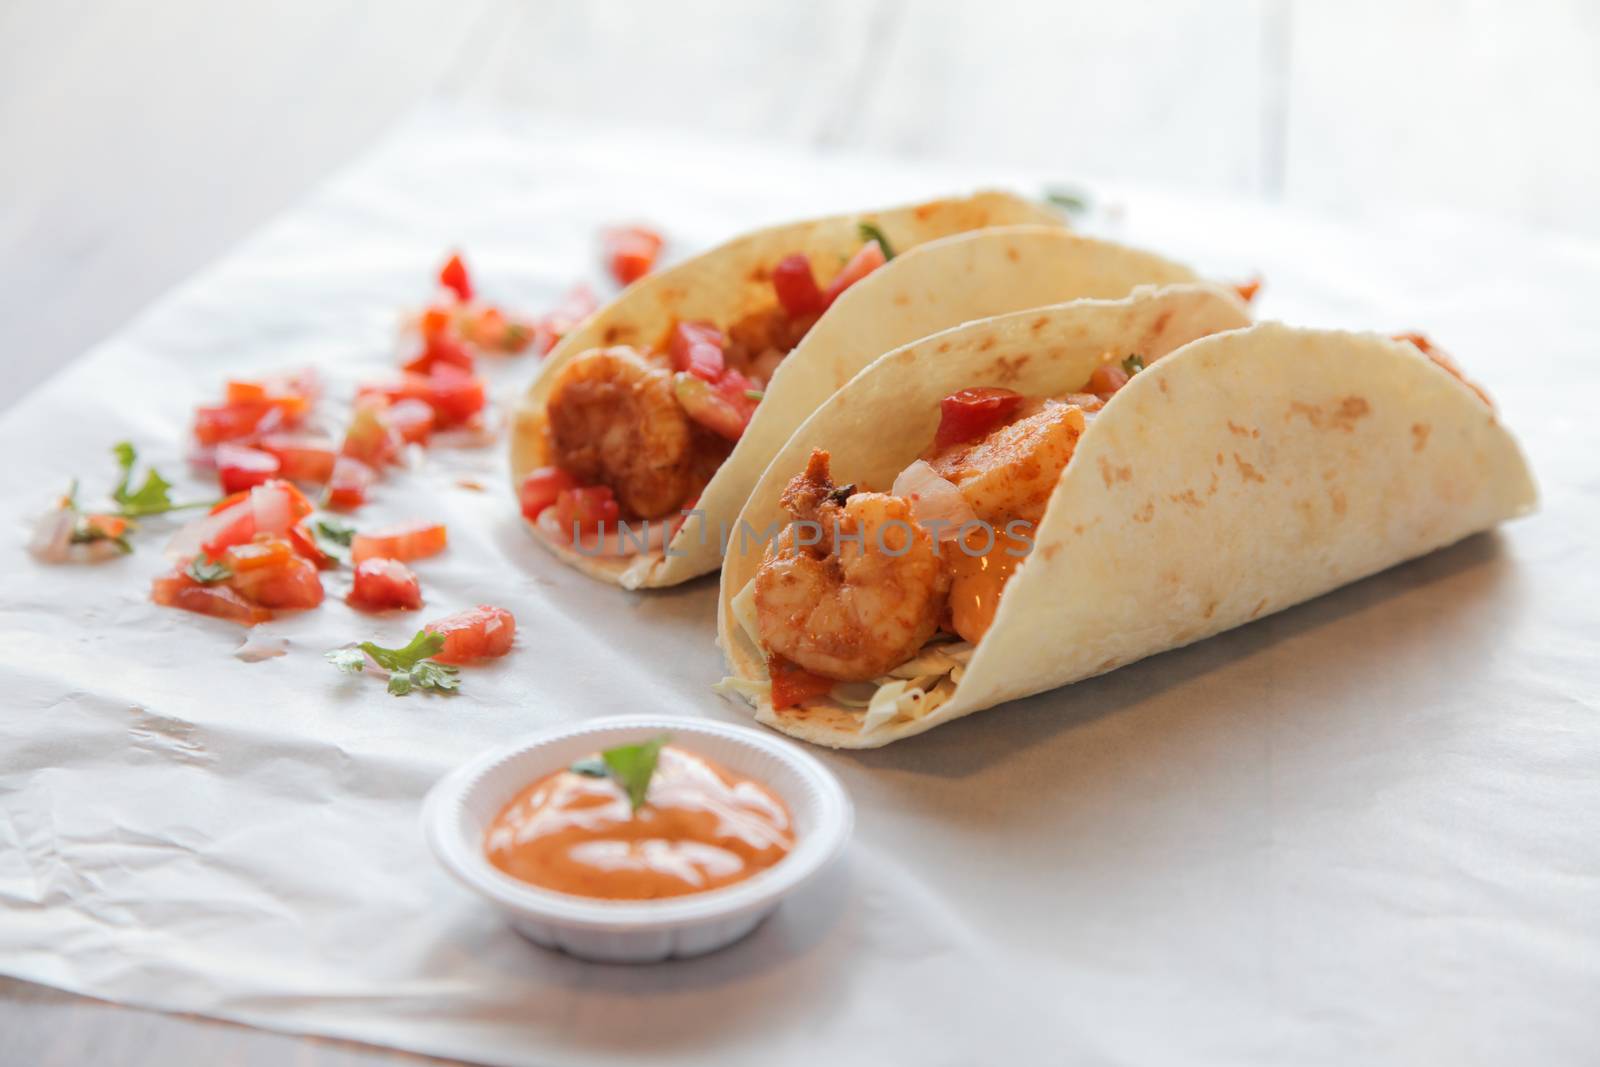 Prawn tacos seafood with condiments by haiderazim